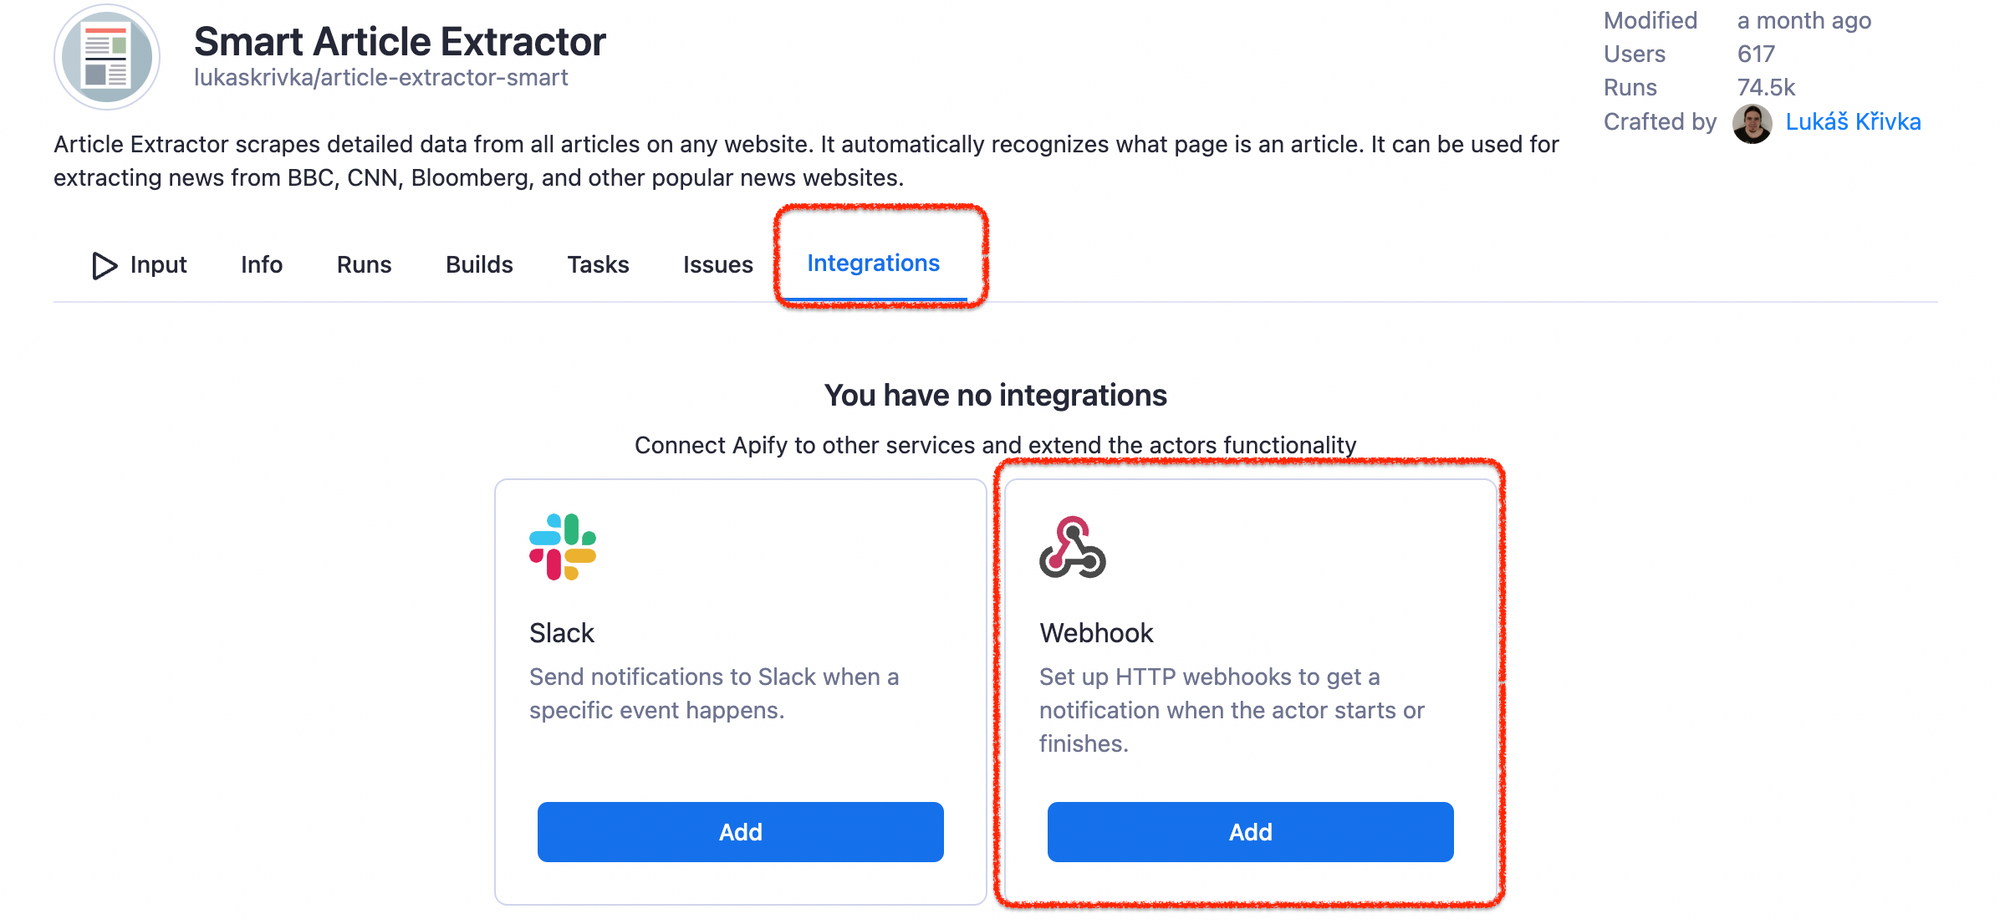 Go back to the Smart Article Extractor task, find the Integrations tab, click to Add a Webhook